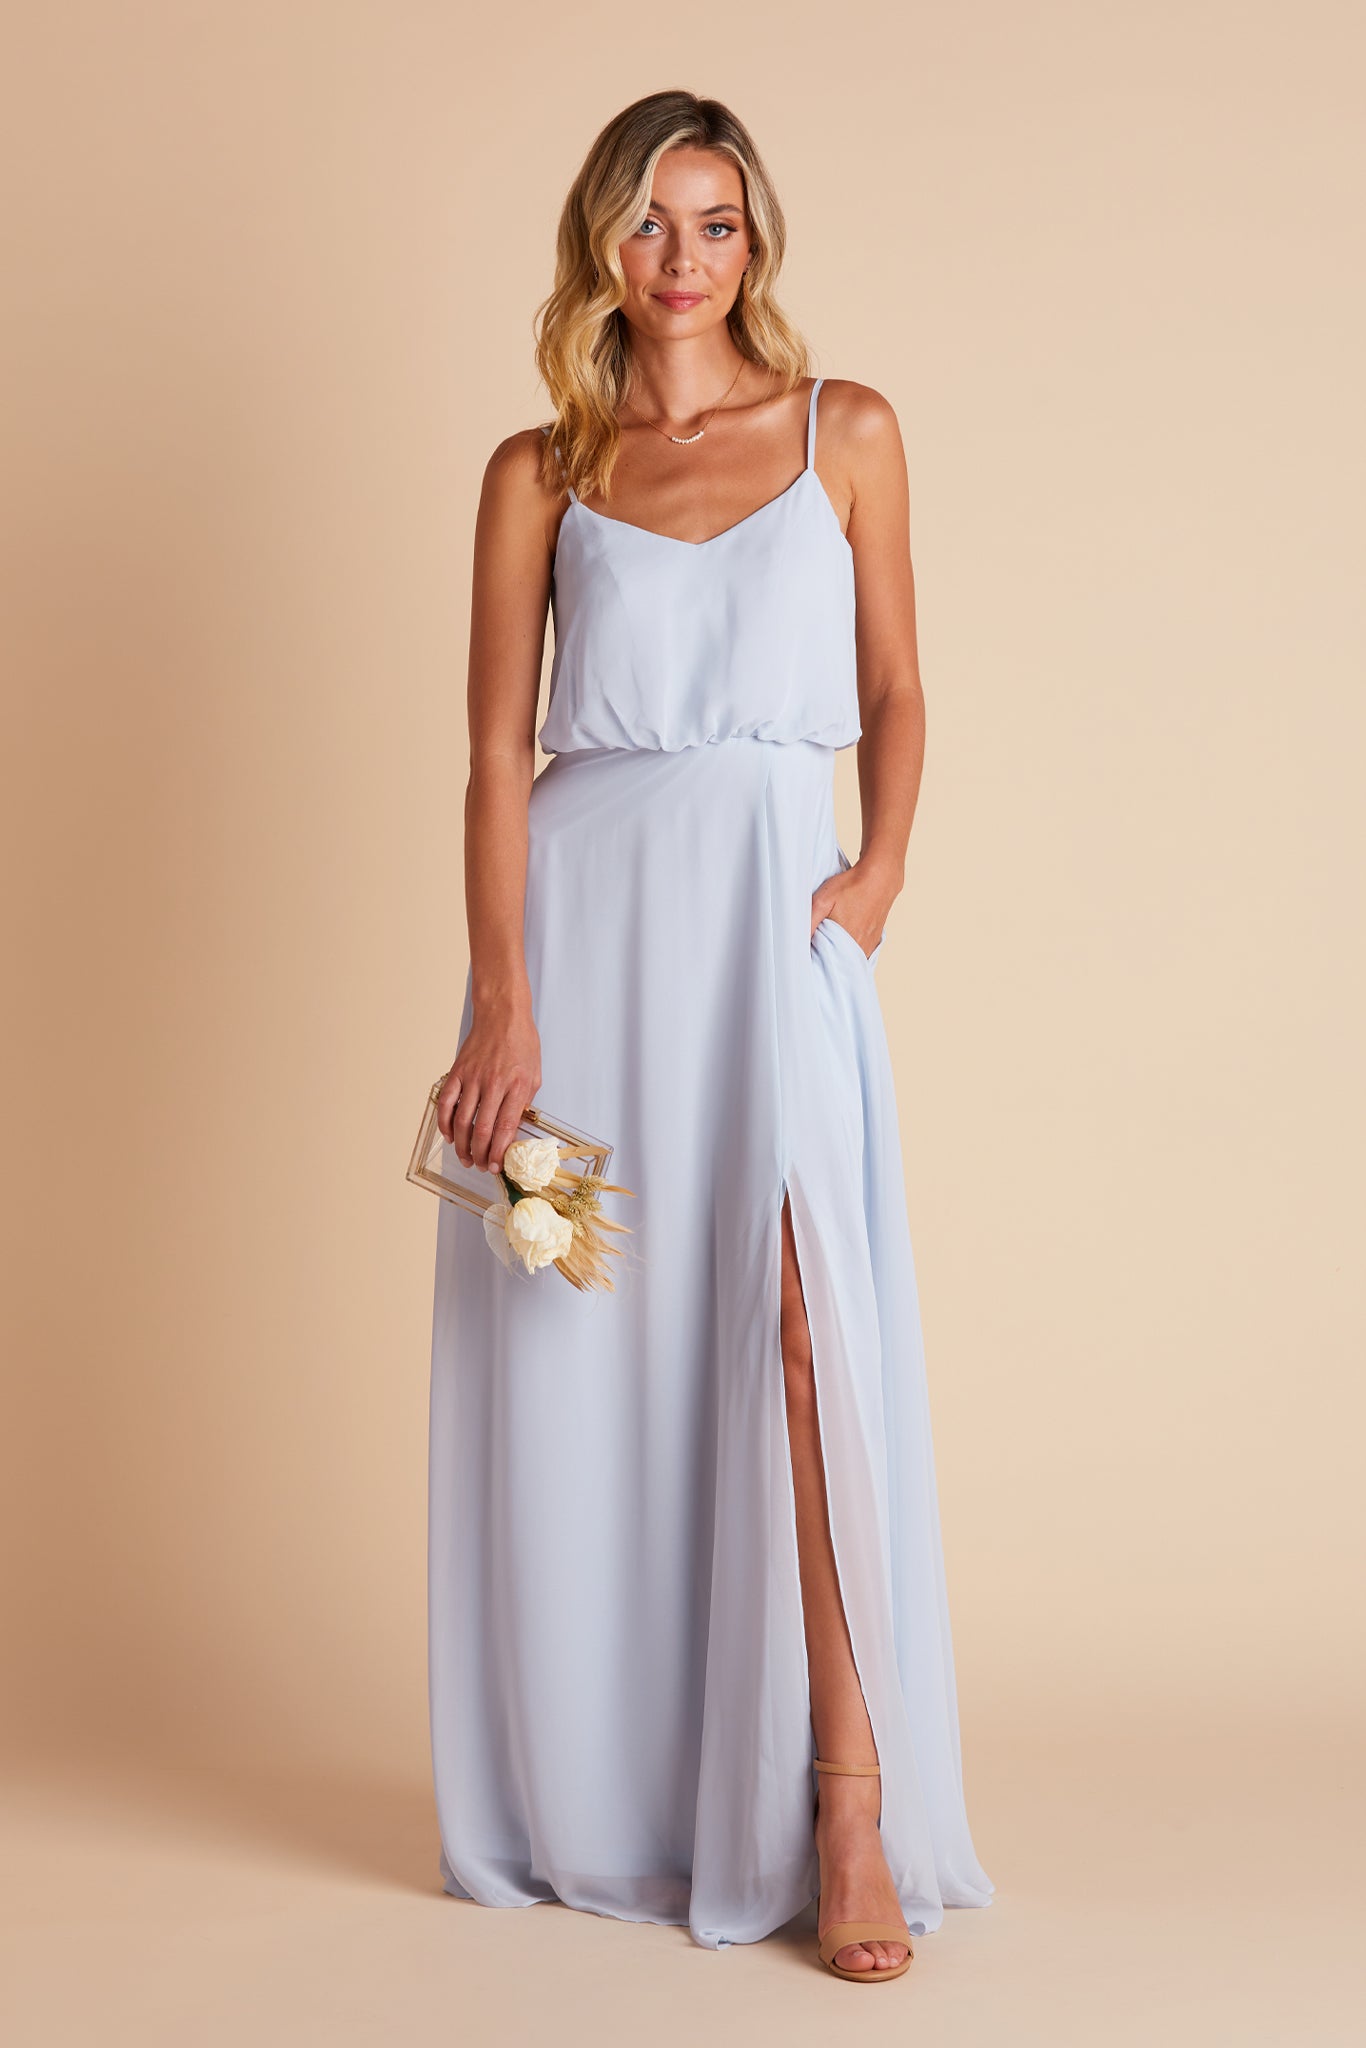 Gwennie bridesmaid dress with slit in ice blue chiffon by Birdy Grey, front view with hand in pocket